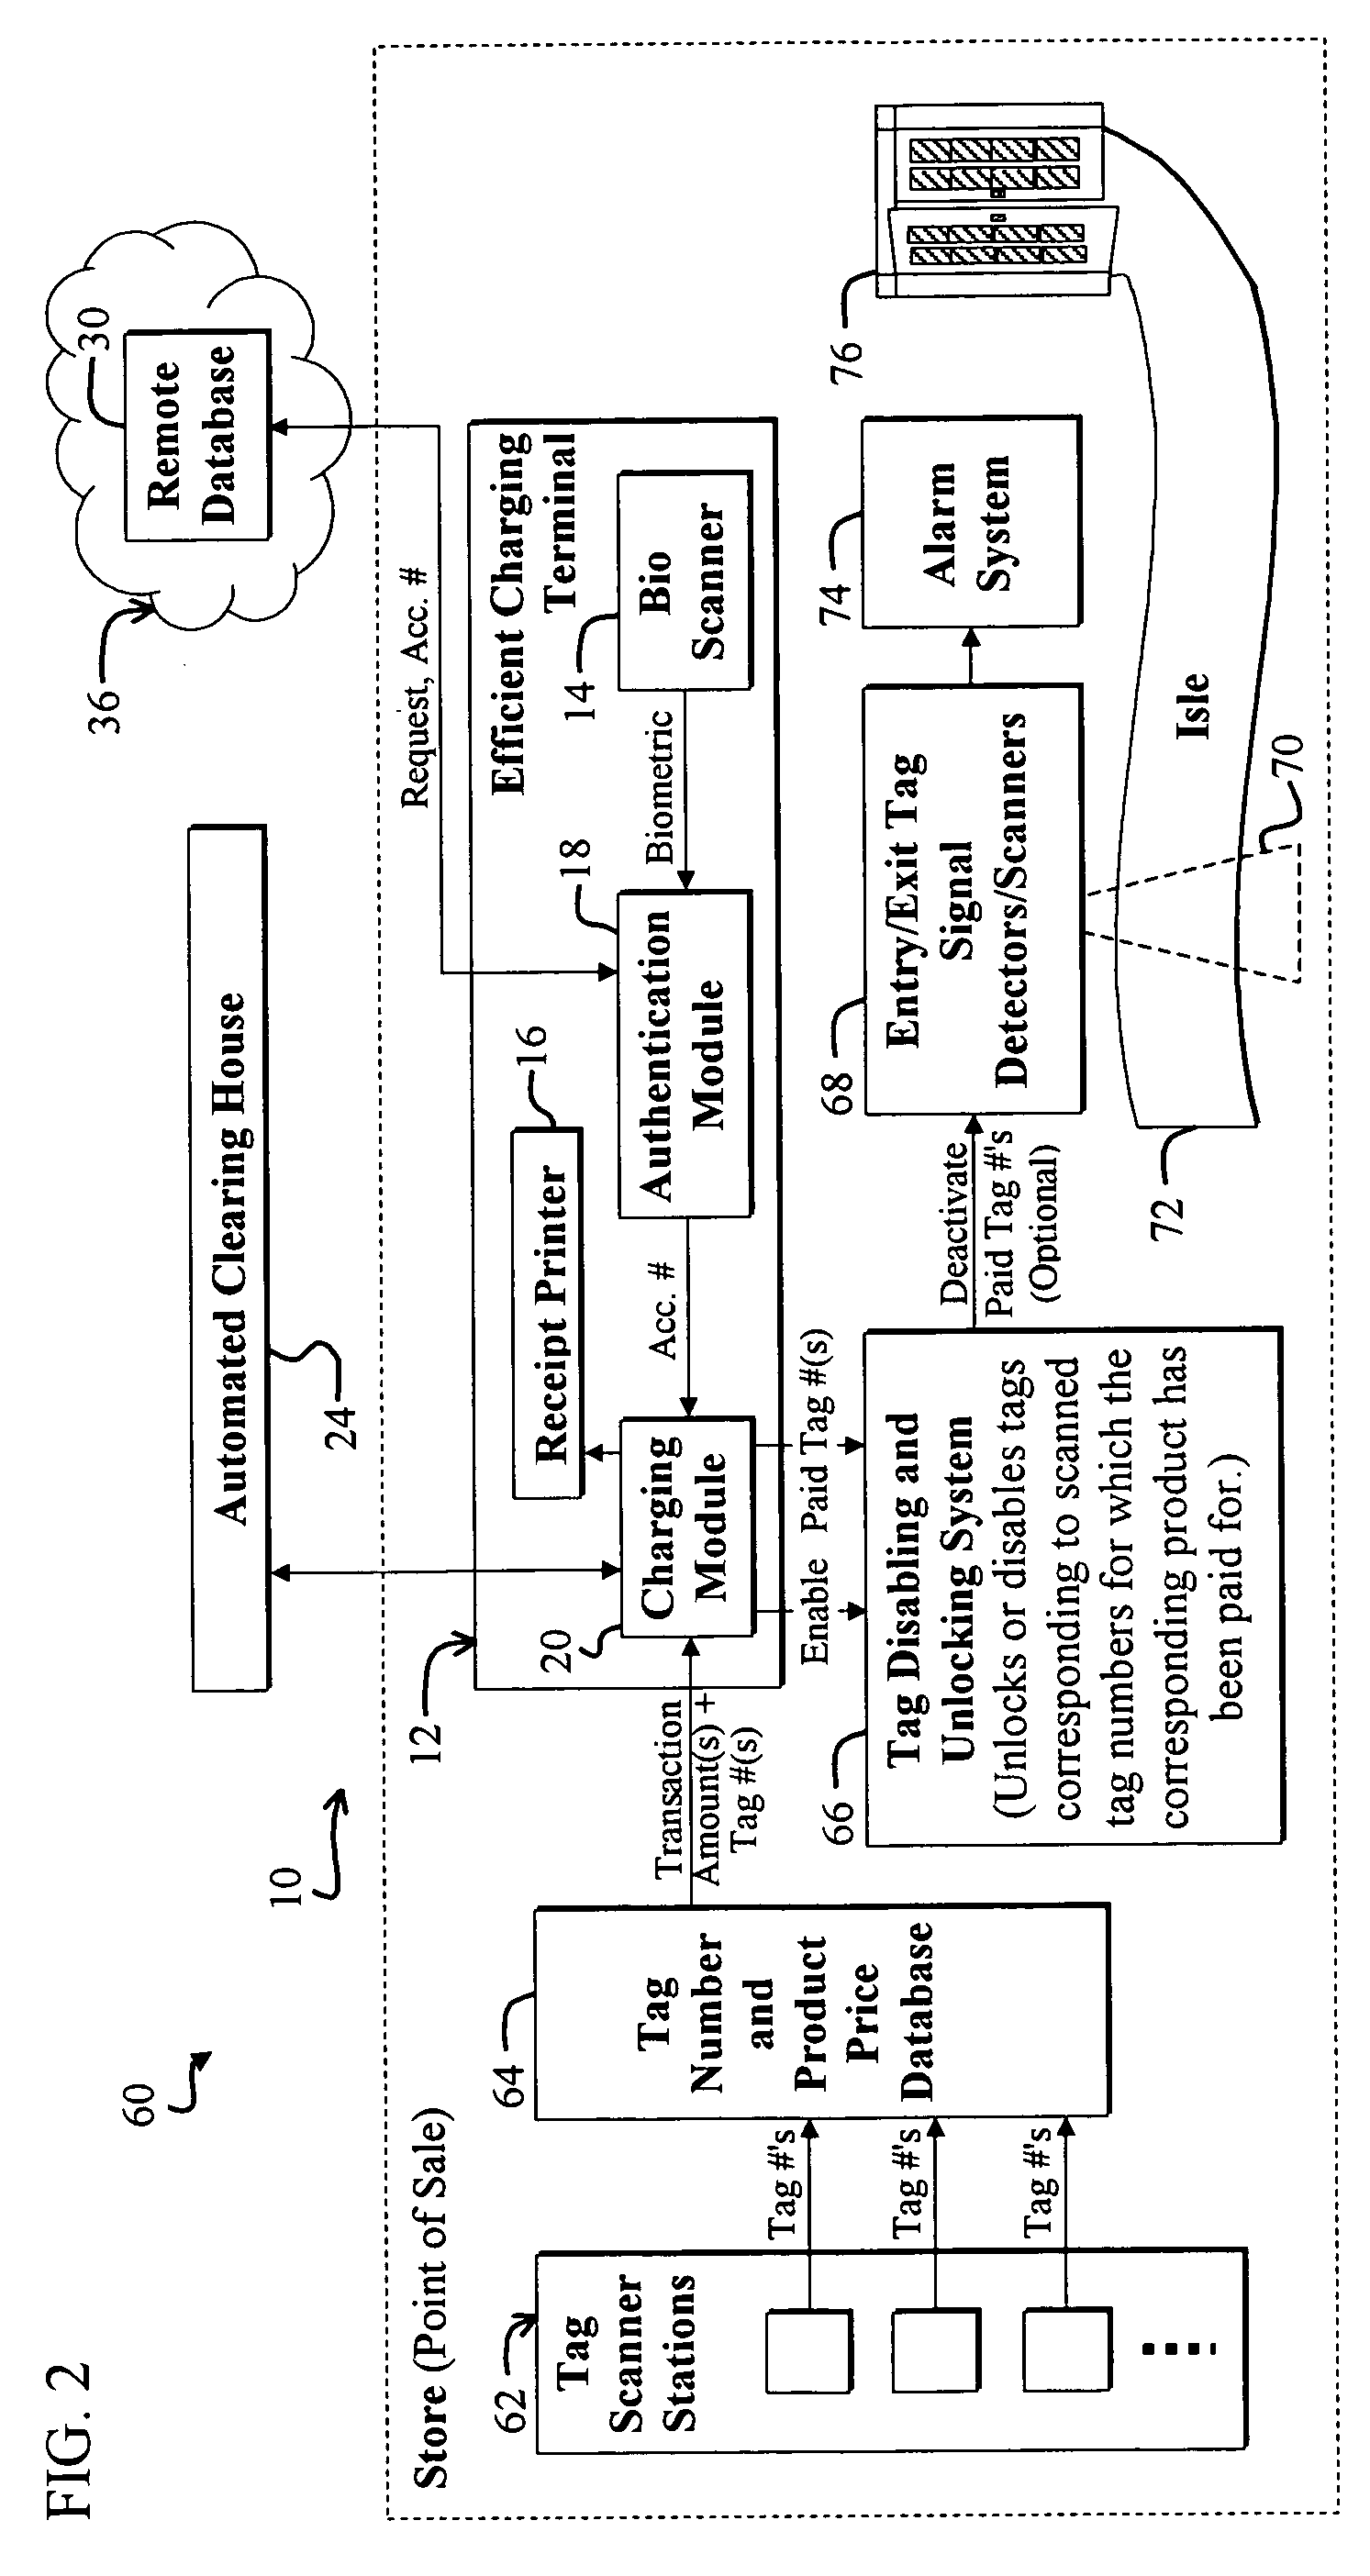 System and method for facilitating monetary transactions